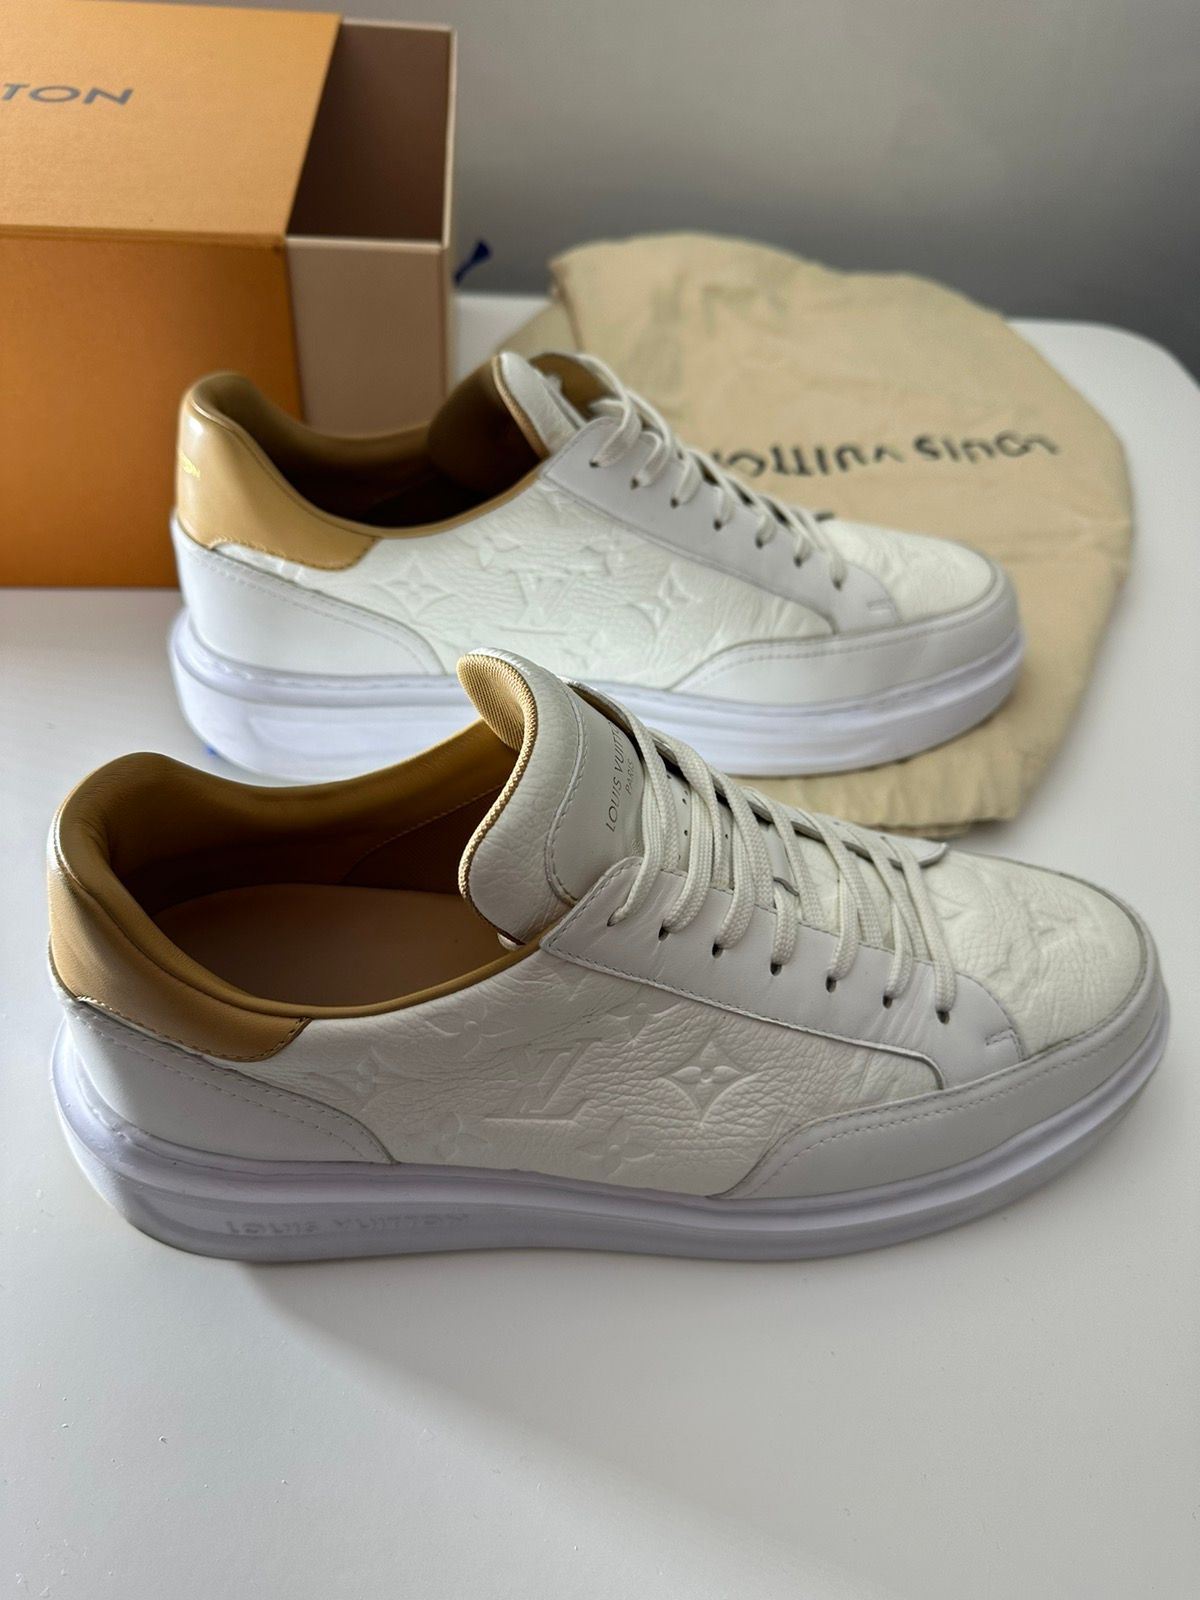 Louis Vuitton Beverly Hills Mens Sneakers 2022 Ss, White, 10.5 (Stock Check Required)